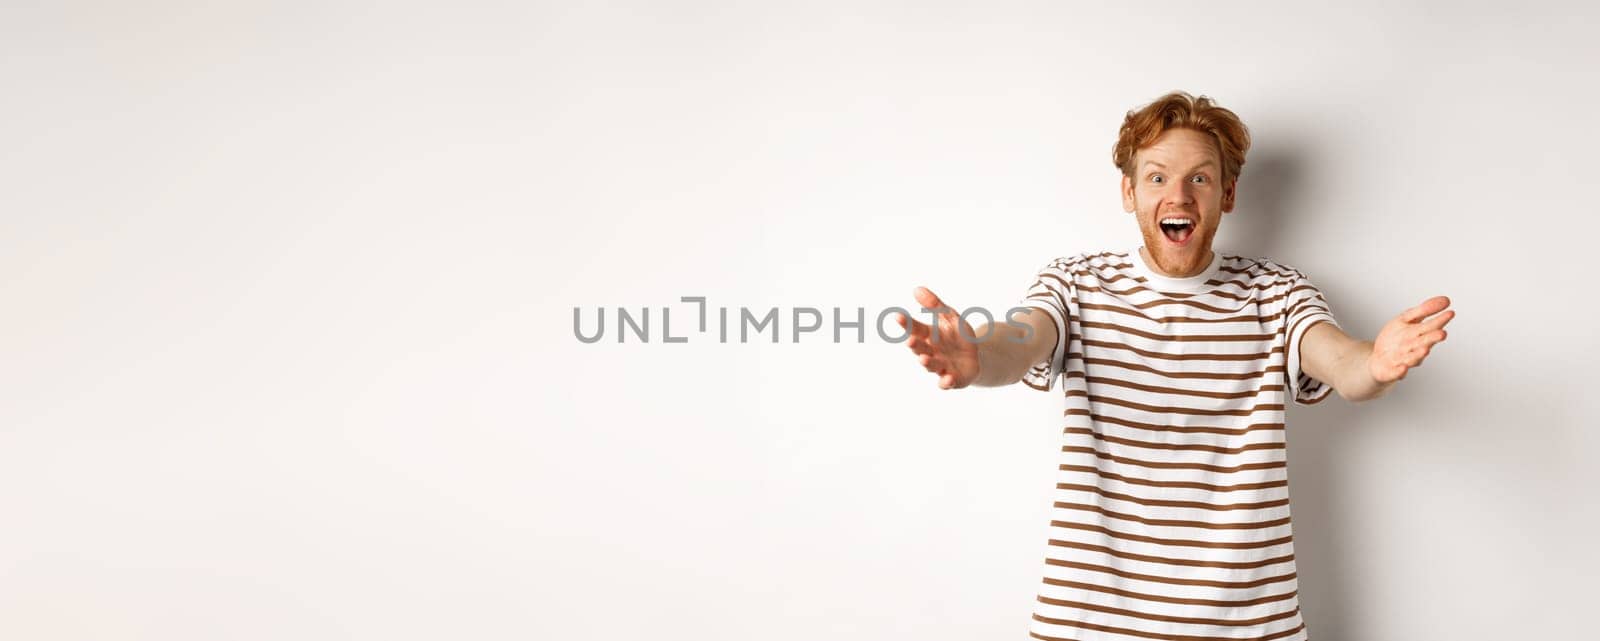 Cheerful man with red curly hair reaching hands forward, stretch out arms to welcome or congratulate you, smiling happy, standing over white background.